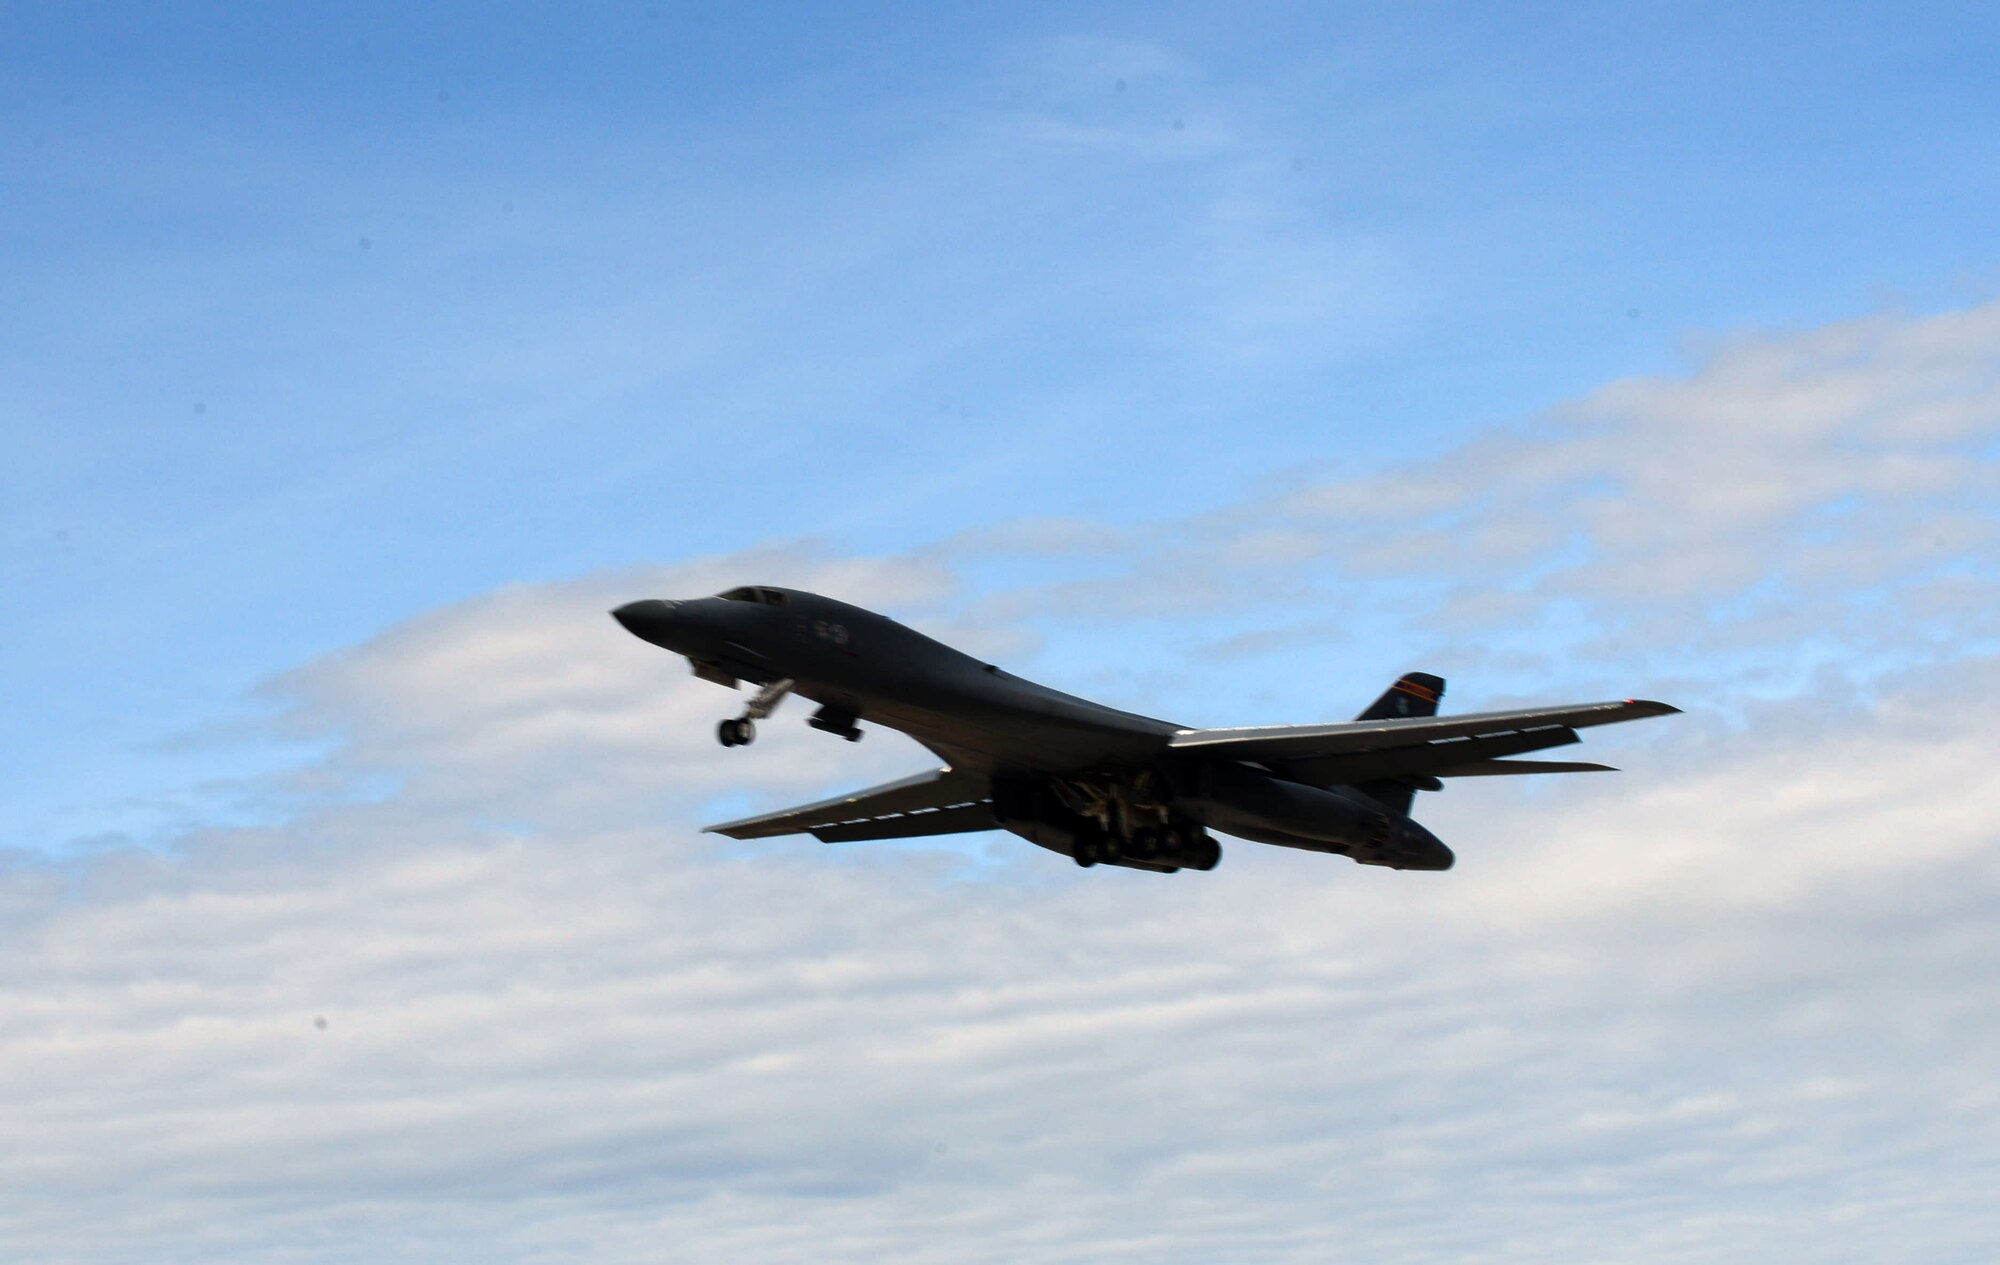 A B-1 bomber takes off to participate in exercise Combat Raider at the Powder River Training Complex near Belle Fourche, S.D., March 15, 2017. The purpose of the exercise is to test several agencies, cohesion and coordination with multiple aircraft flying to complete a scenario. (U.S. Air Force photo by Airman 1st Class Donald C. Knechtel)